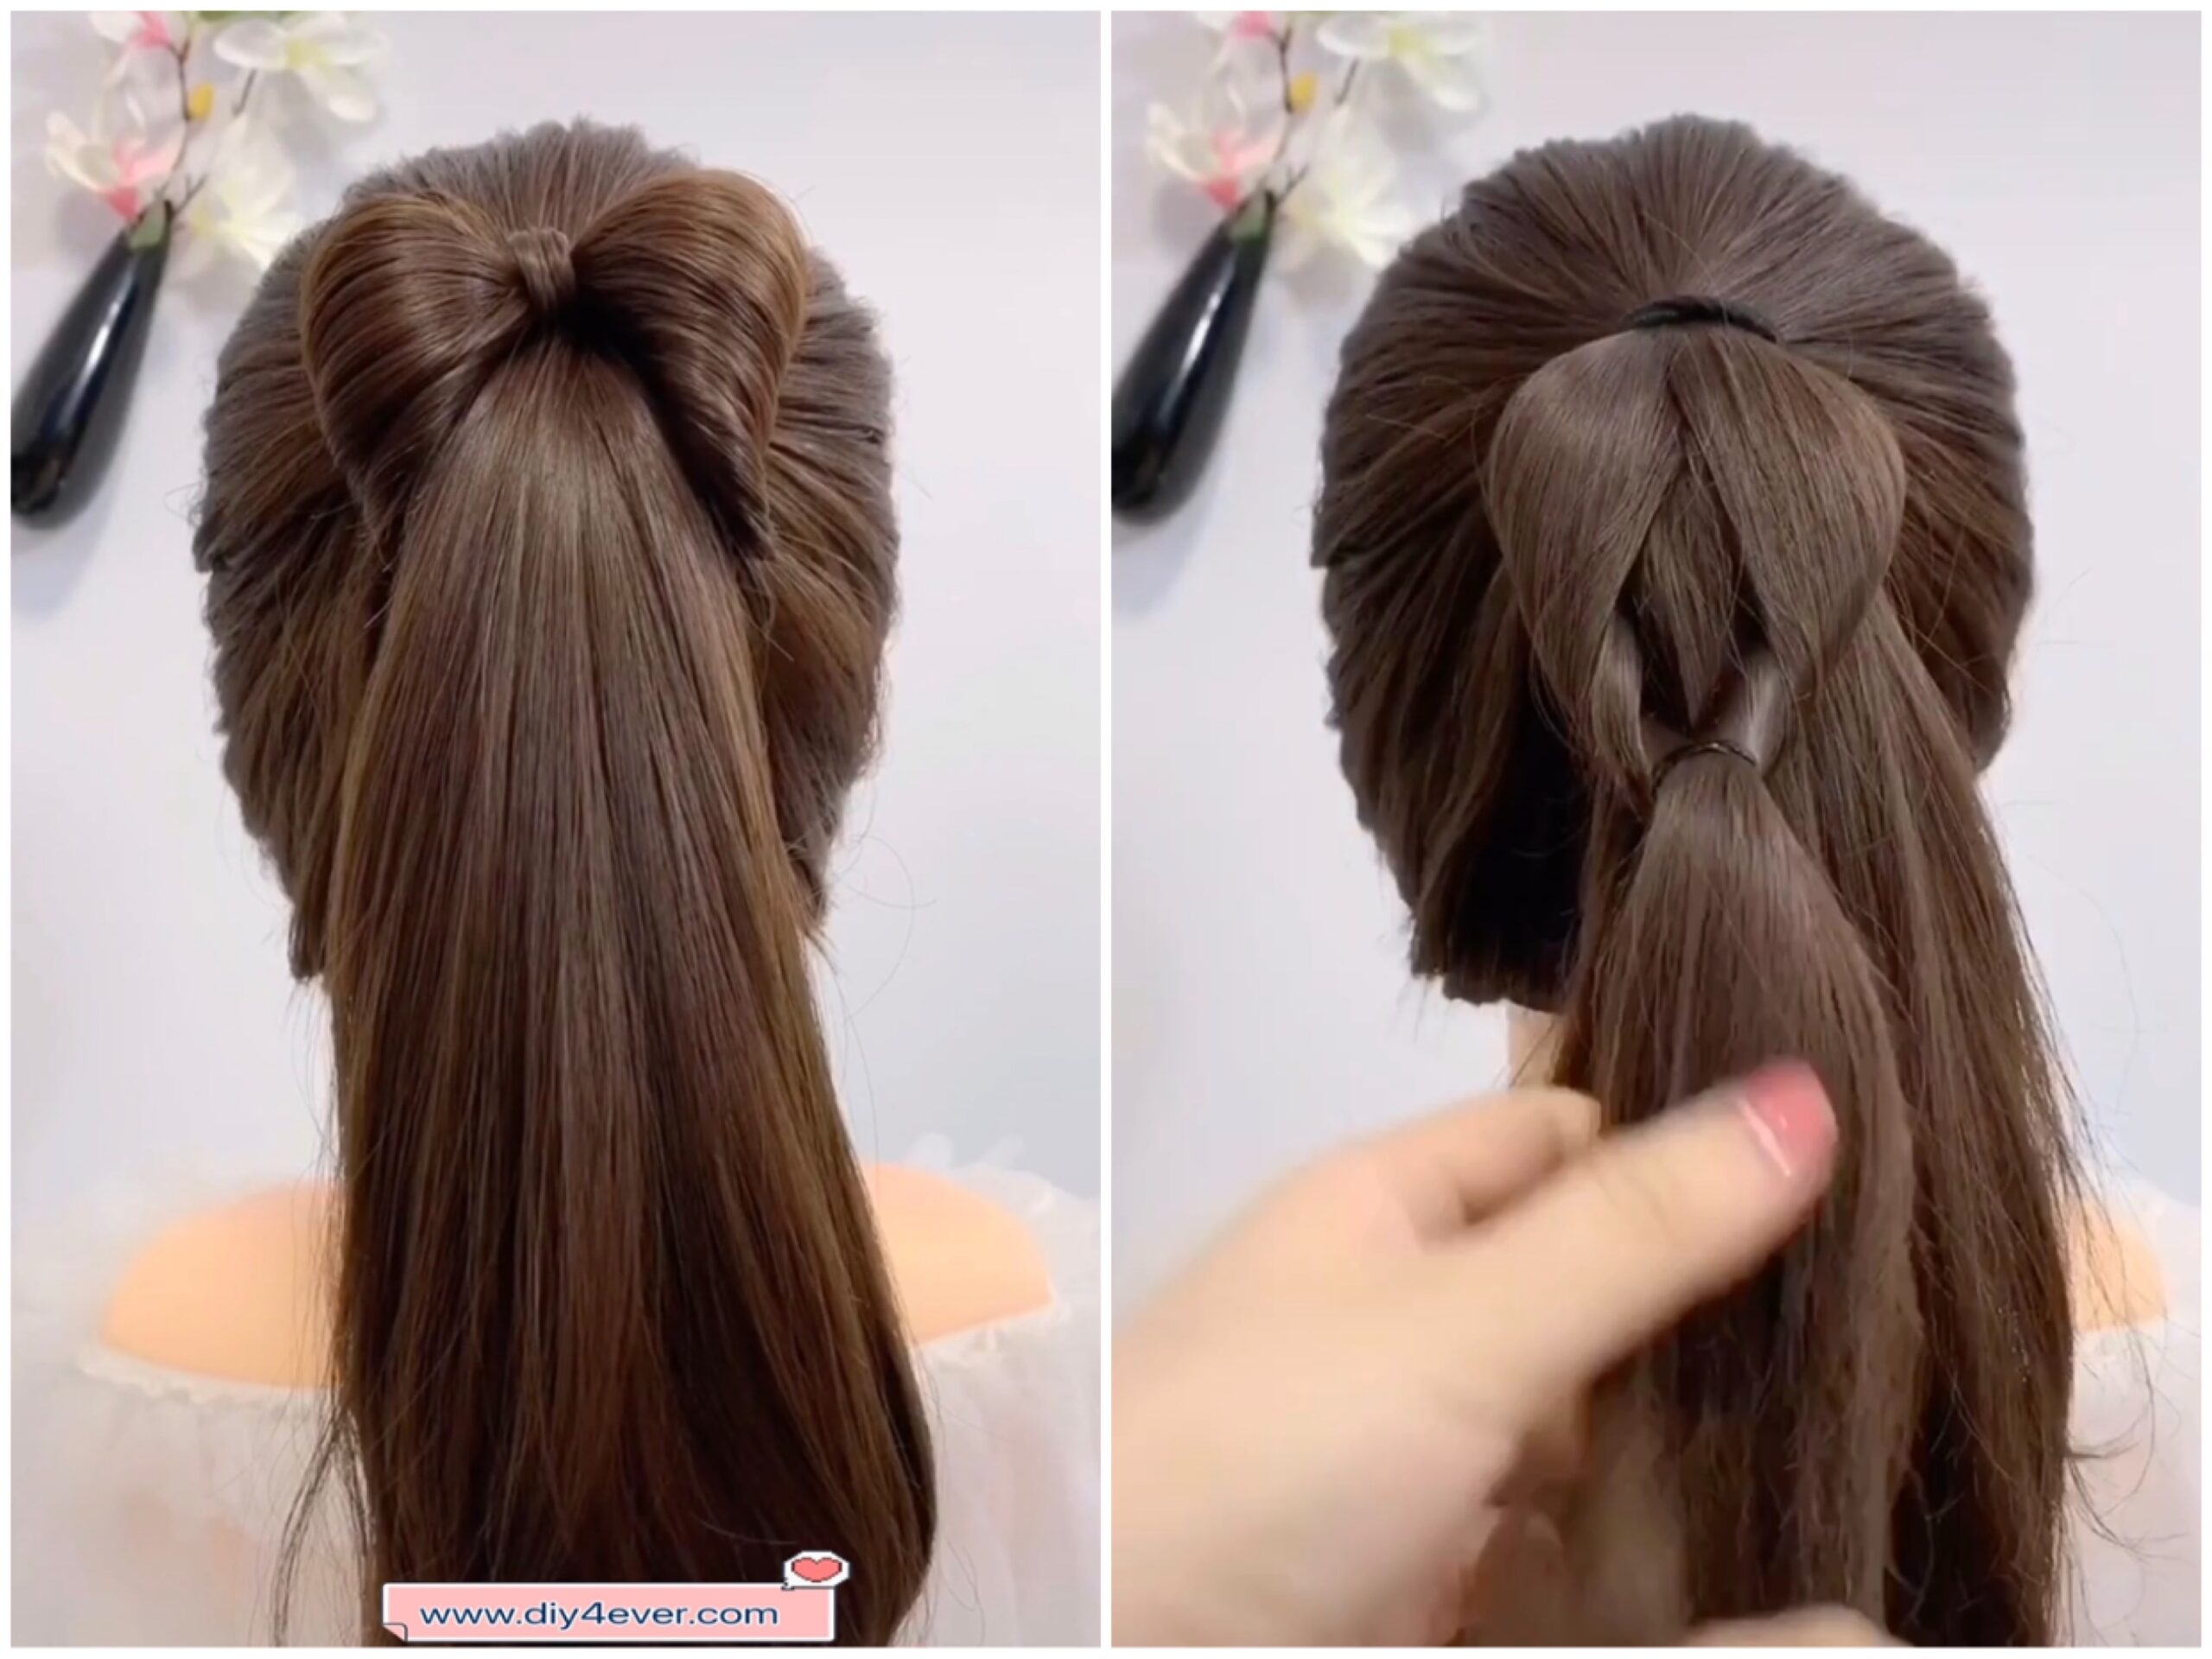 DIY How To Make Hair Bow  Hairstyle TUTORIAL